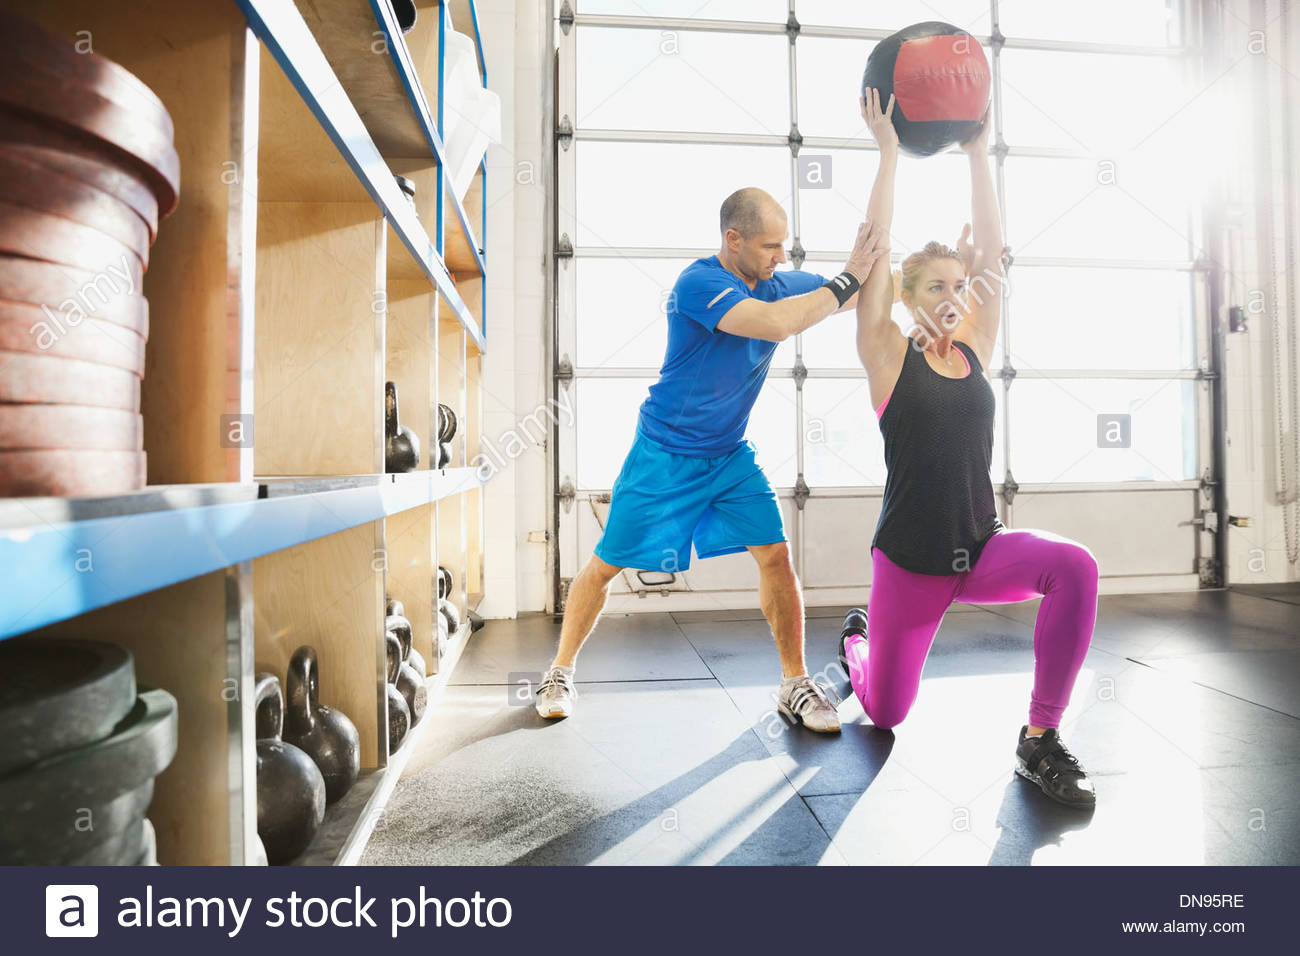 Gym instructor assisting woman with medicine ball lunge Stock Photo